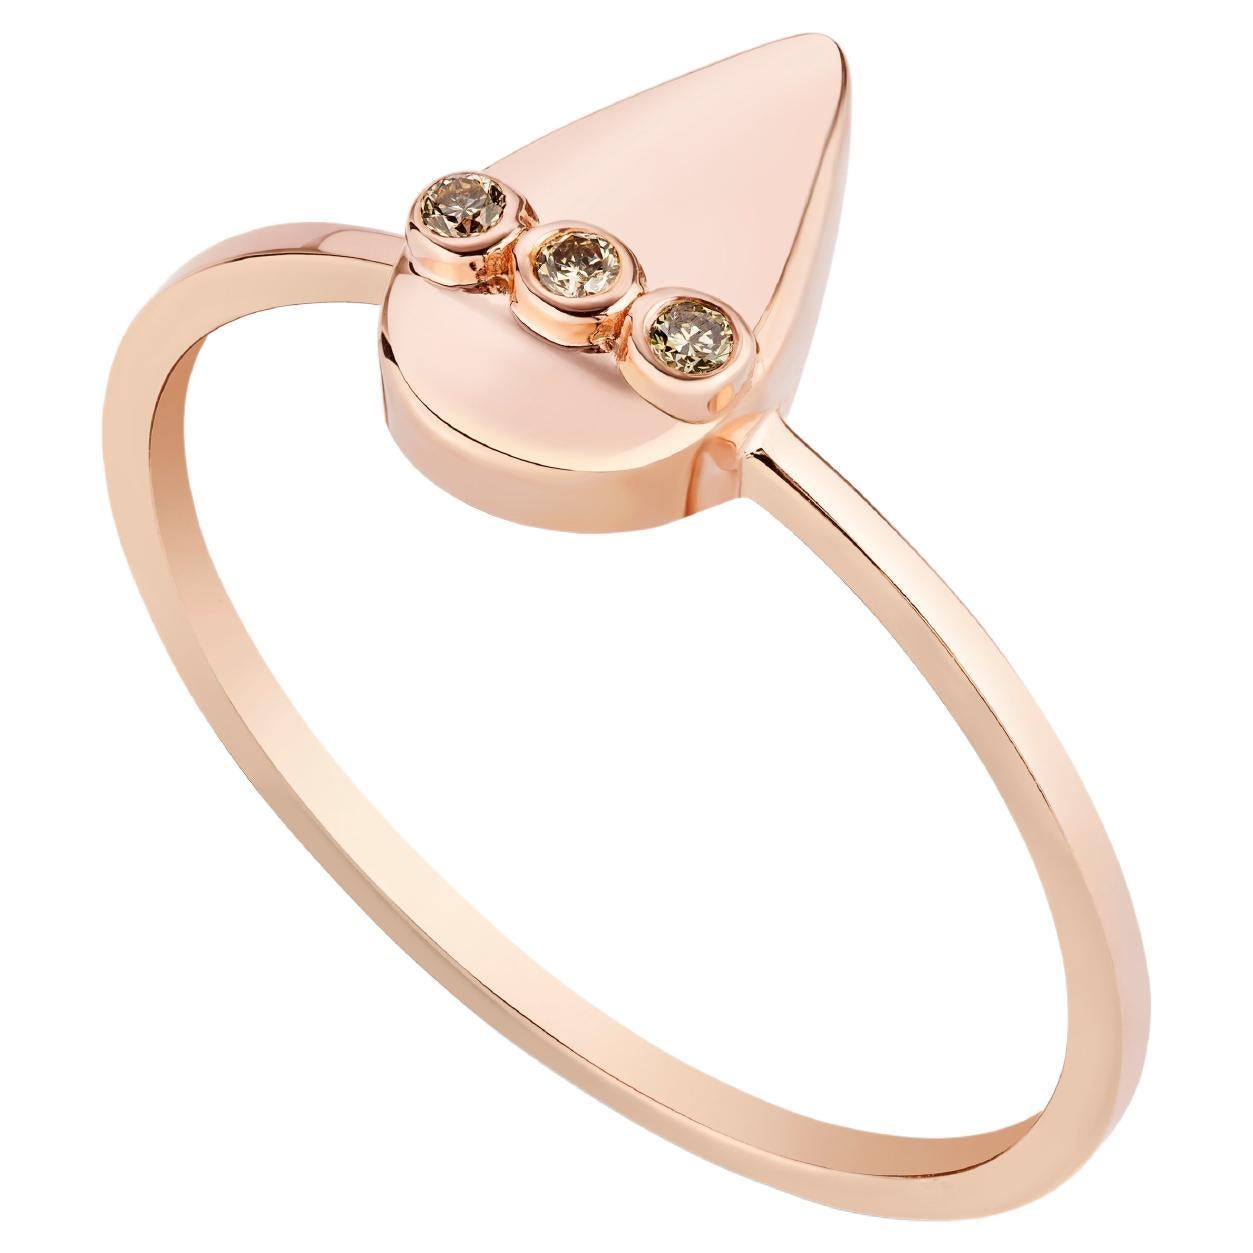 18k rose gold ring with champagne hued diamond drop US size 8